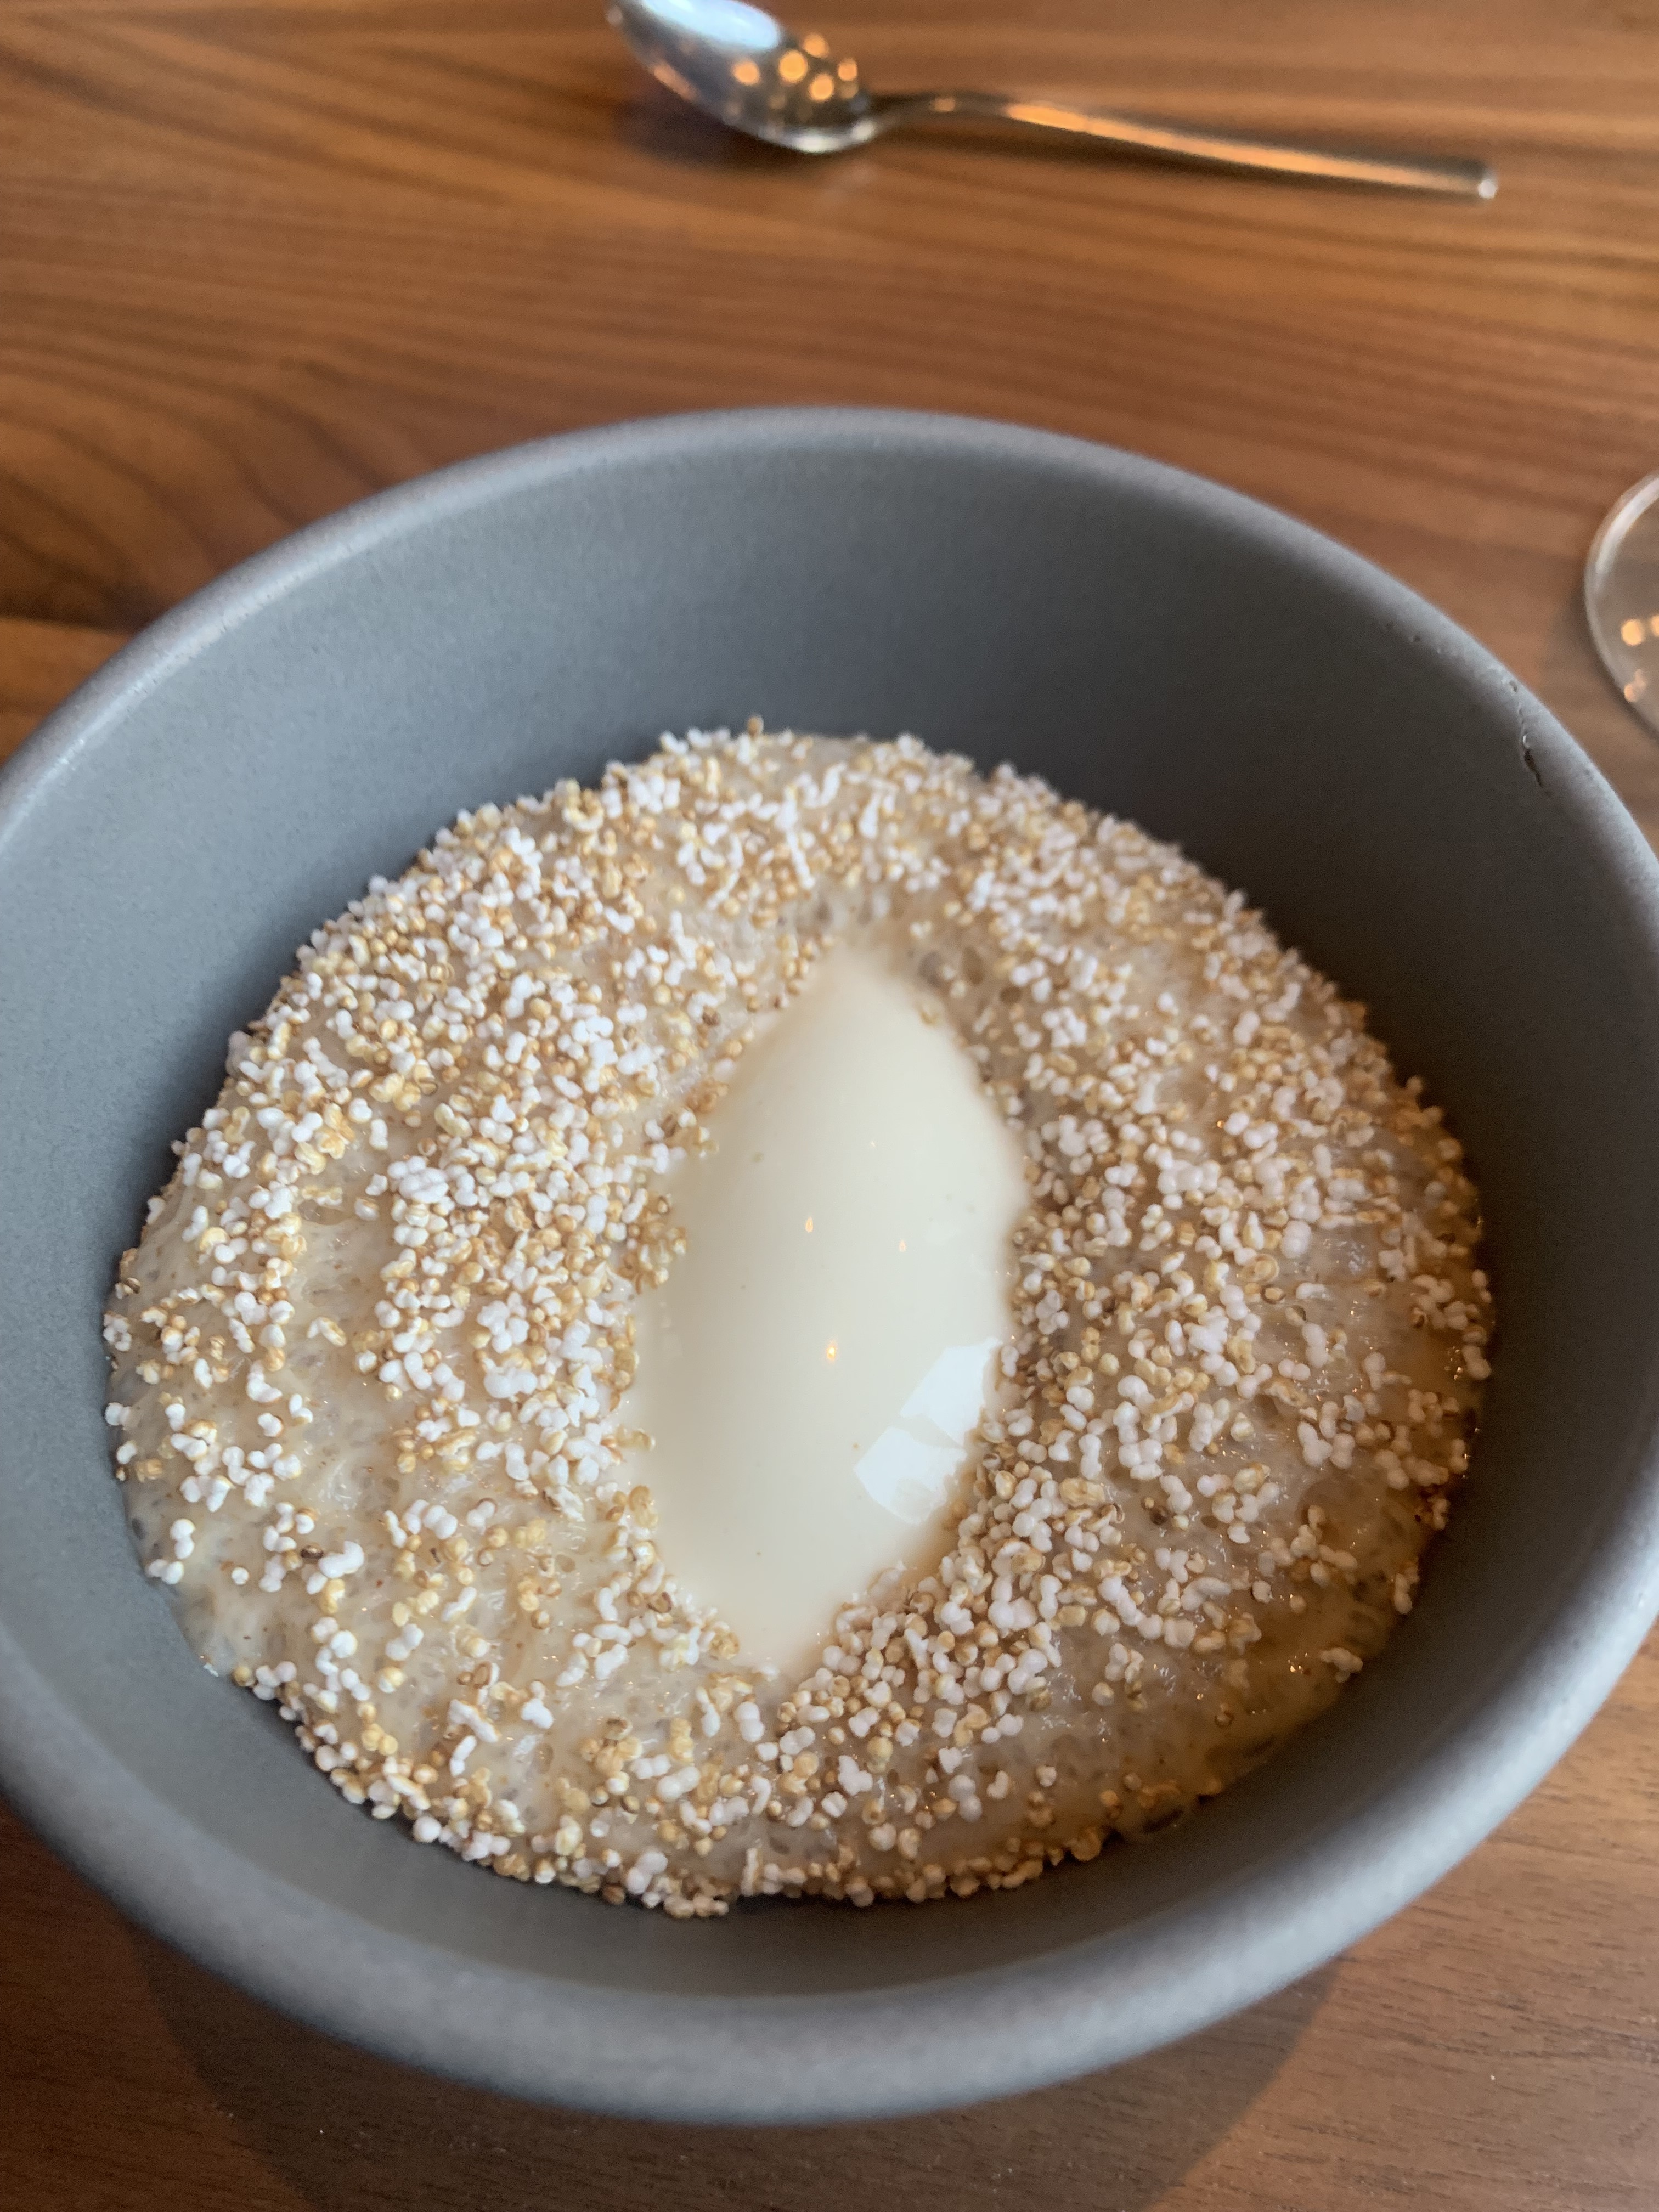 Light-brown pudding studded with toasted buckwheat grains. In the very center, like a cat's pupil, is an oval of ice cream.